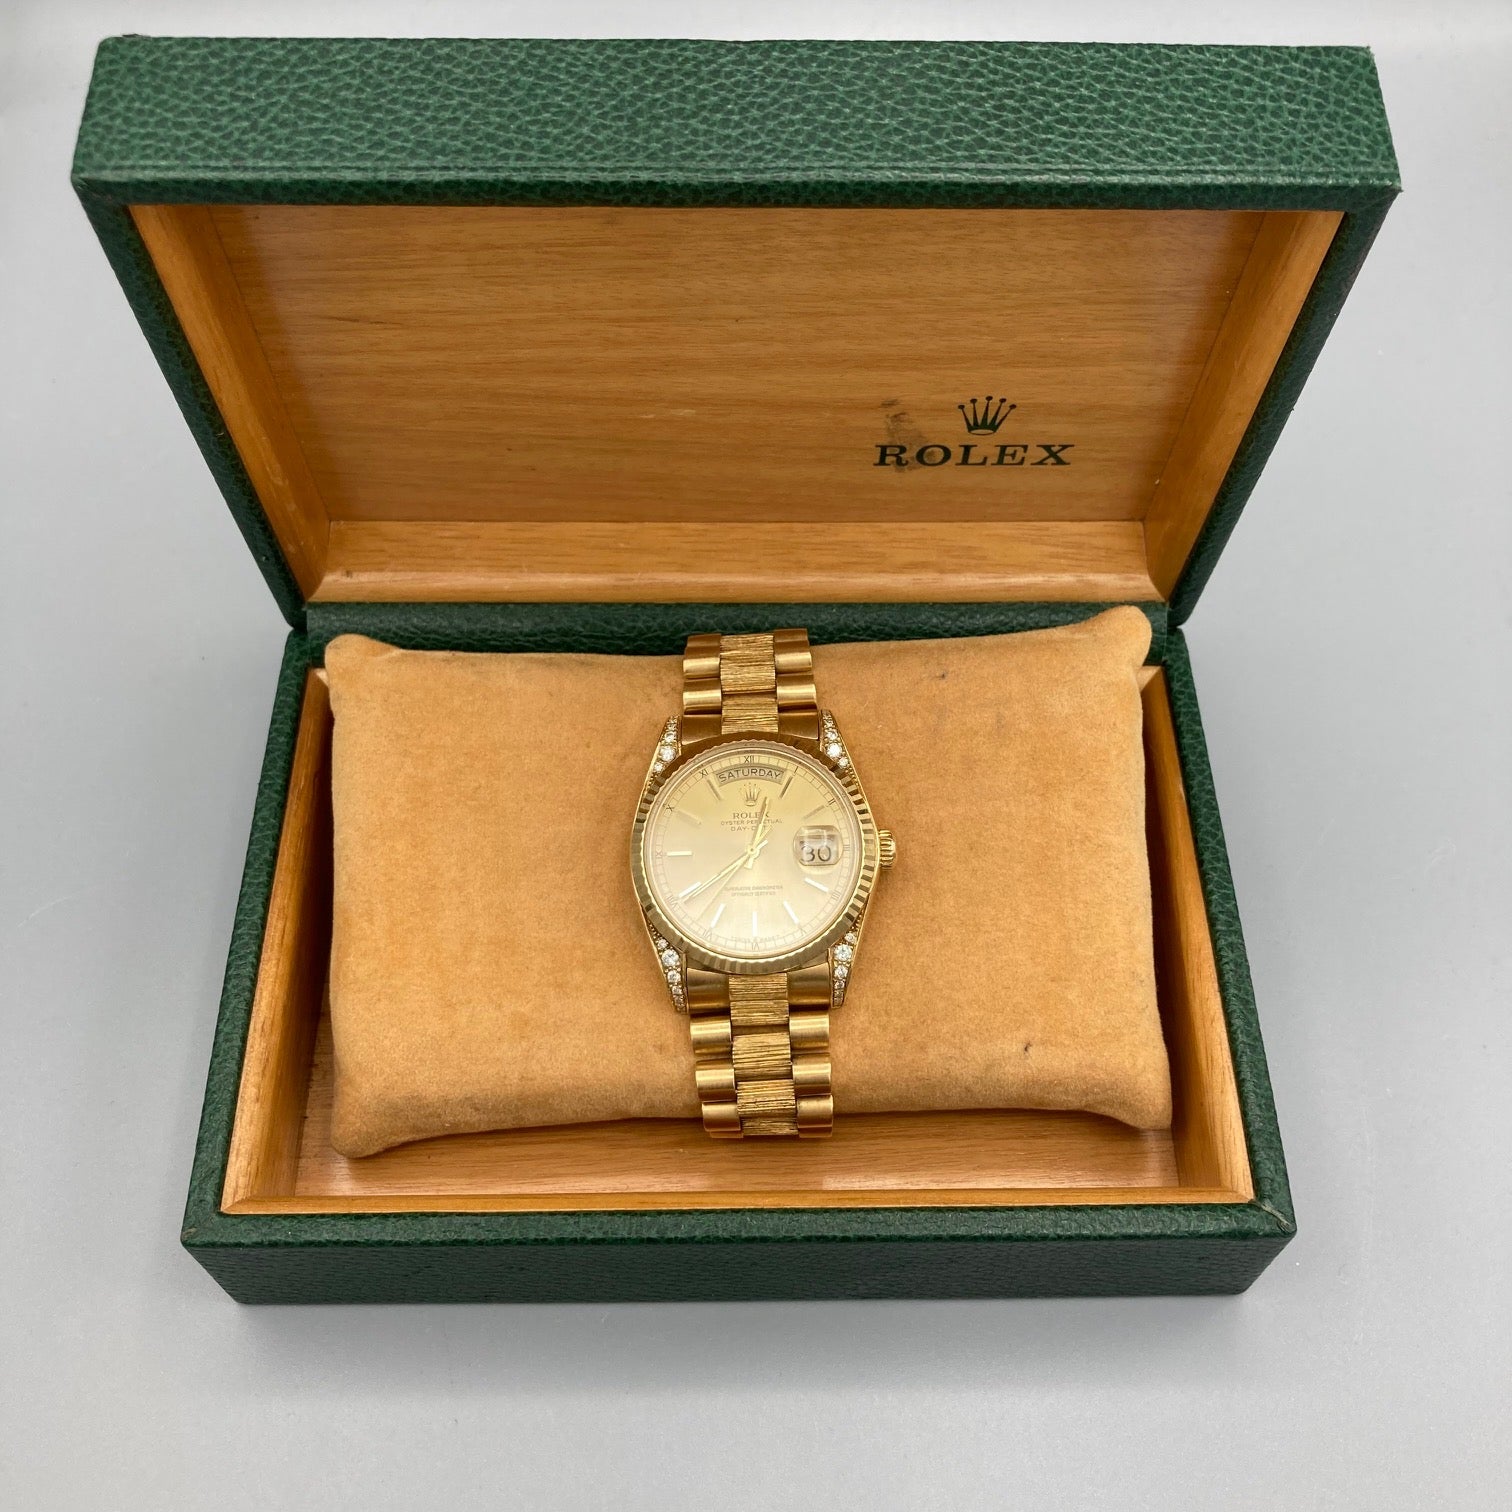 Rolex President Day-Date 36mm Yellow Gold Champagne Dial Watch 18038